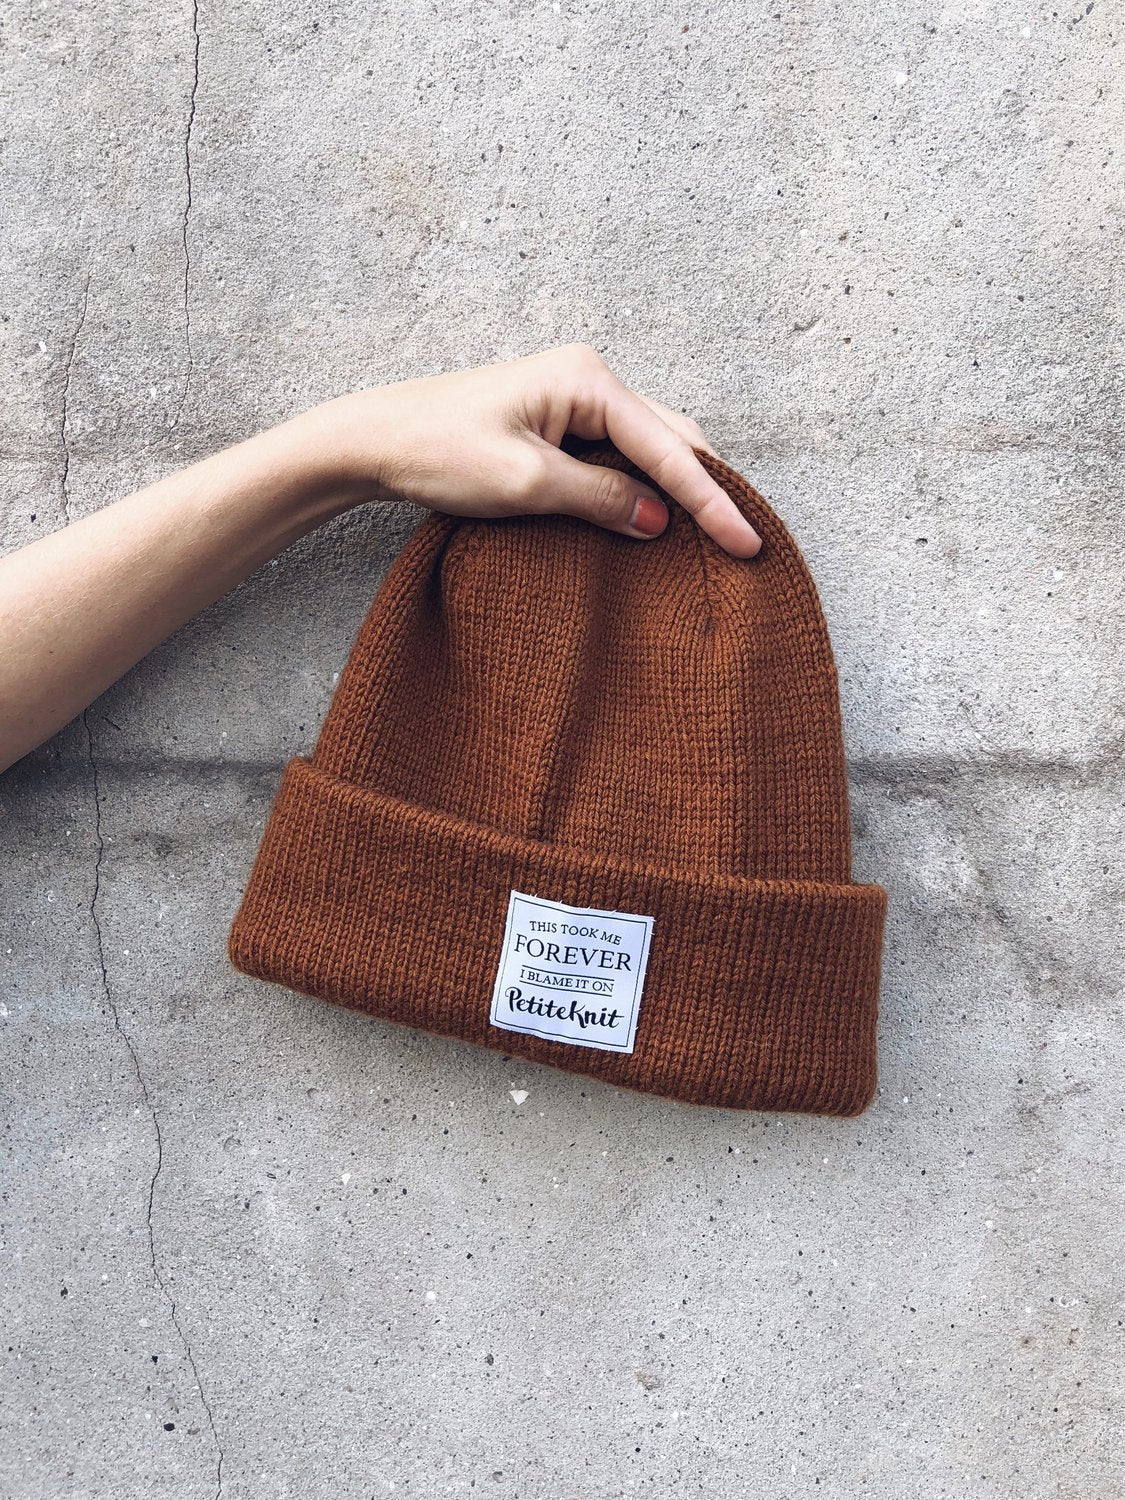 "Winter Is Coming - Knit Faster"-label